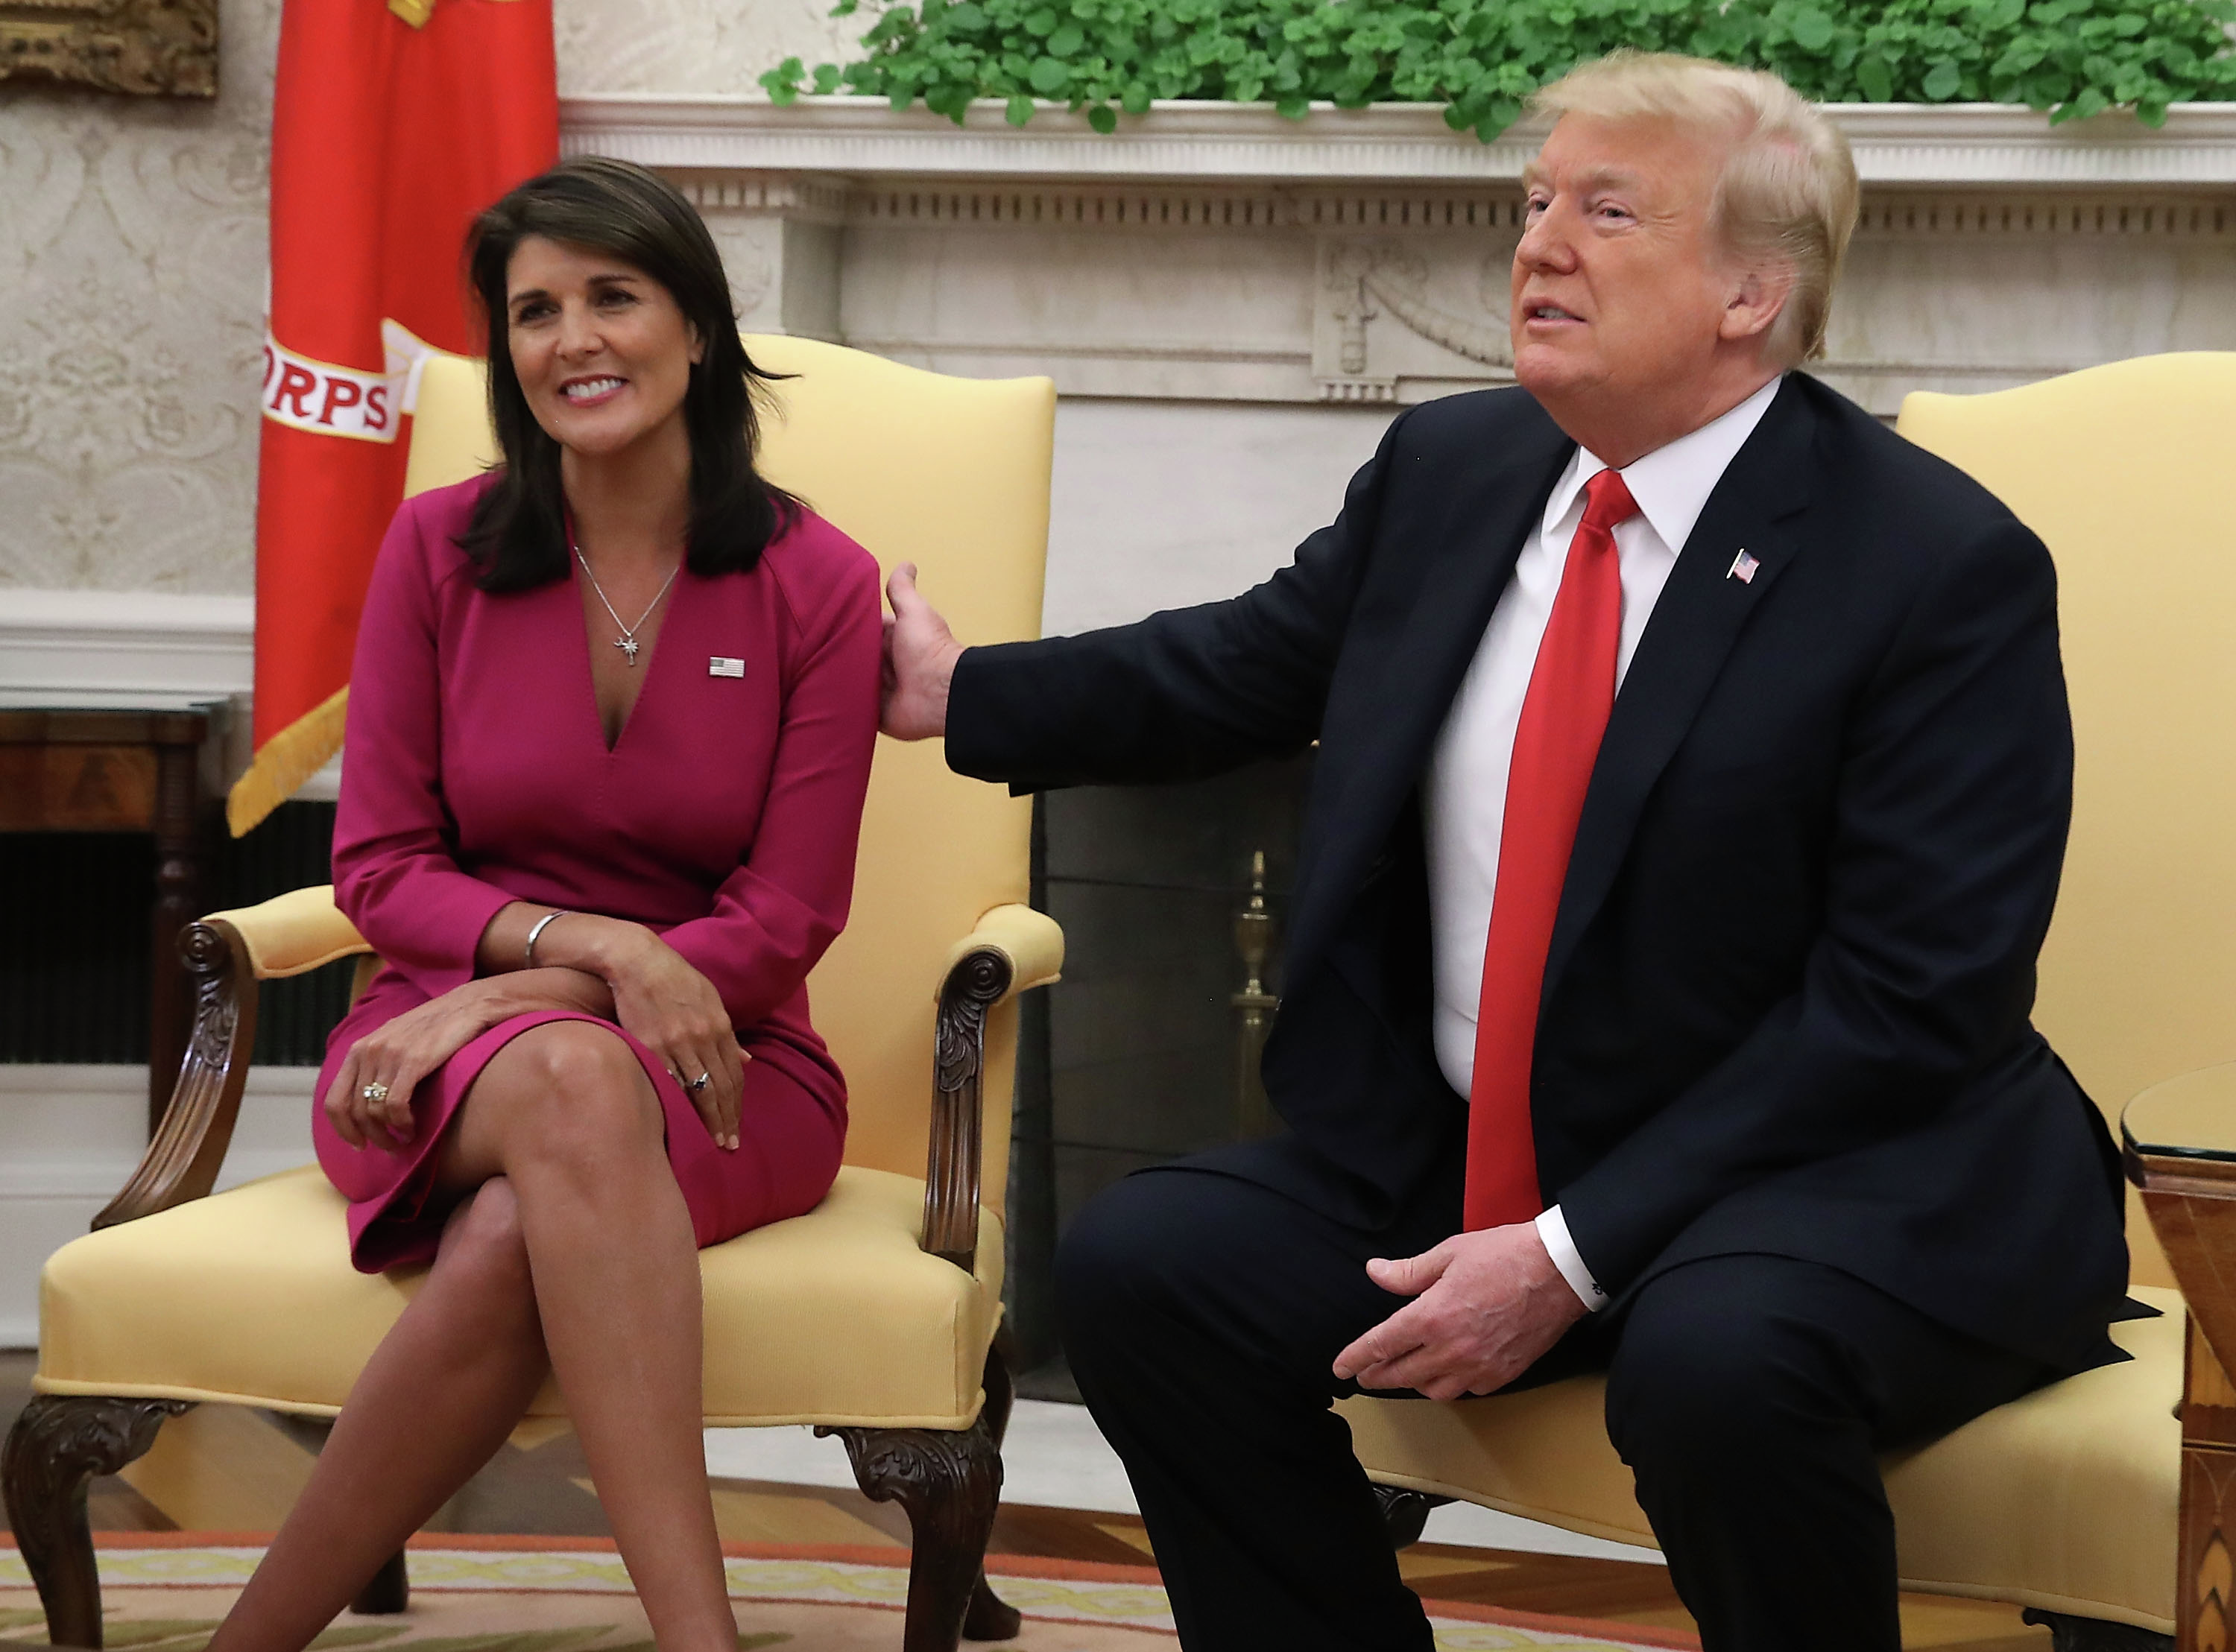 Liberal Heads Spin After Haley Endorses Trump